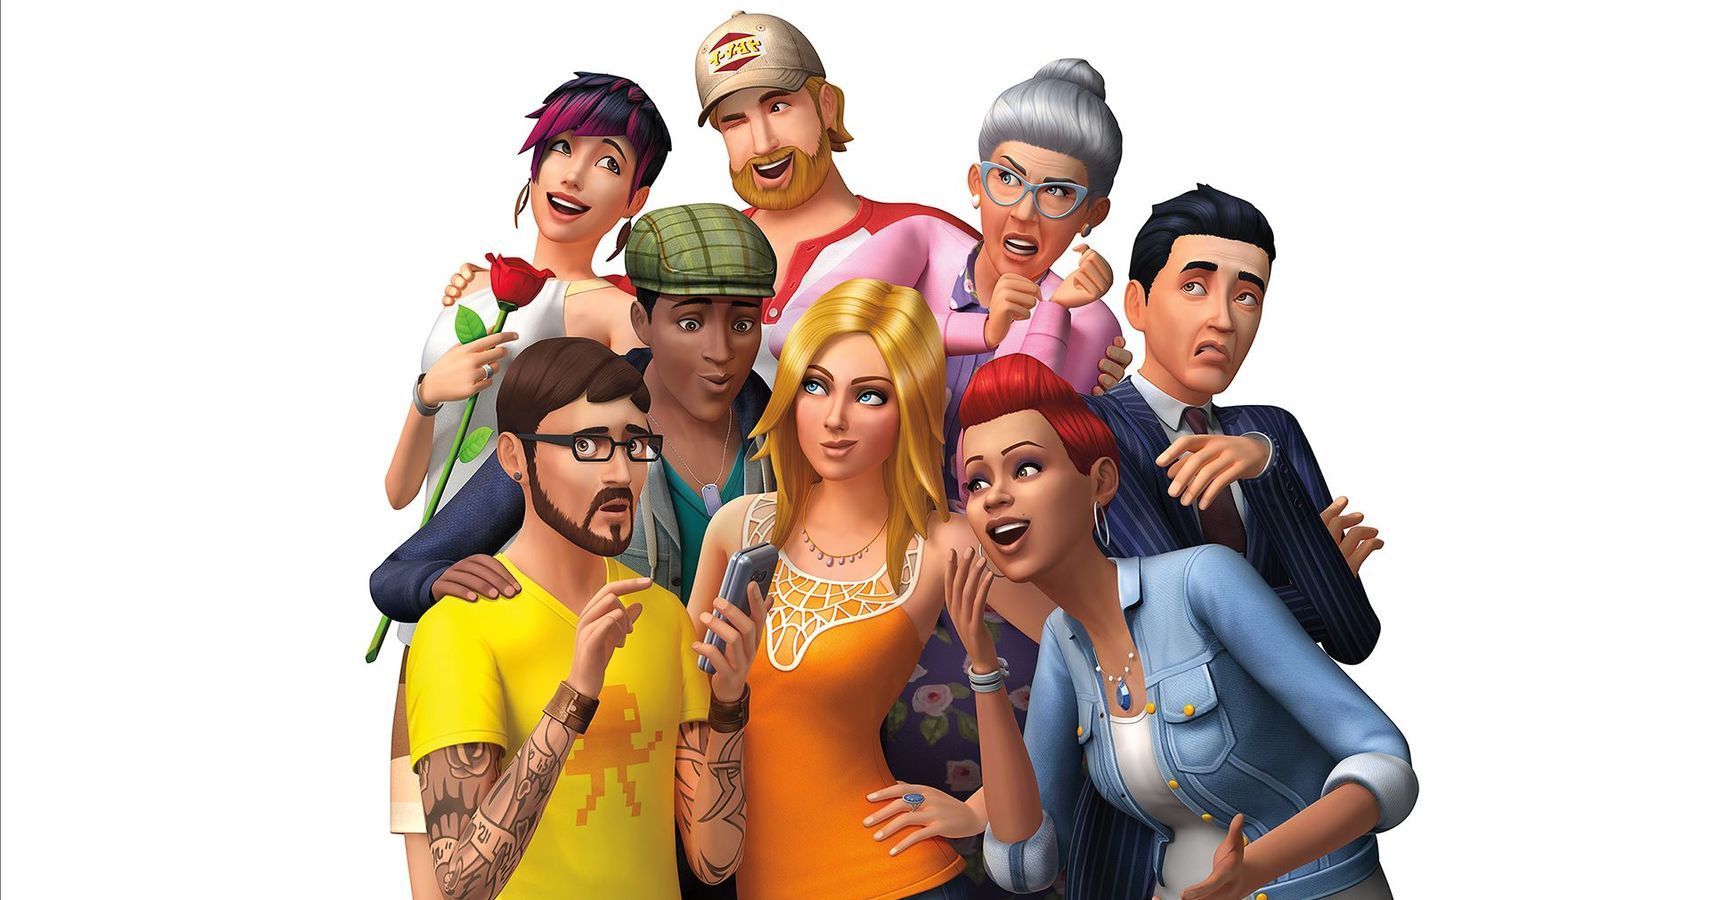 MUST KNOW Cheats for The Sims 4 *cheat codes are so necessary for this  game* 